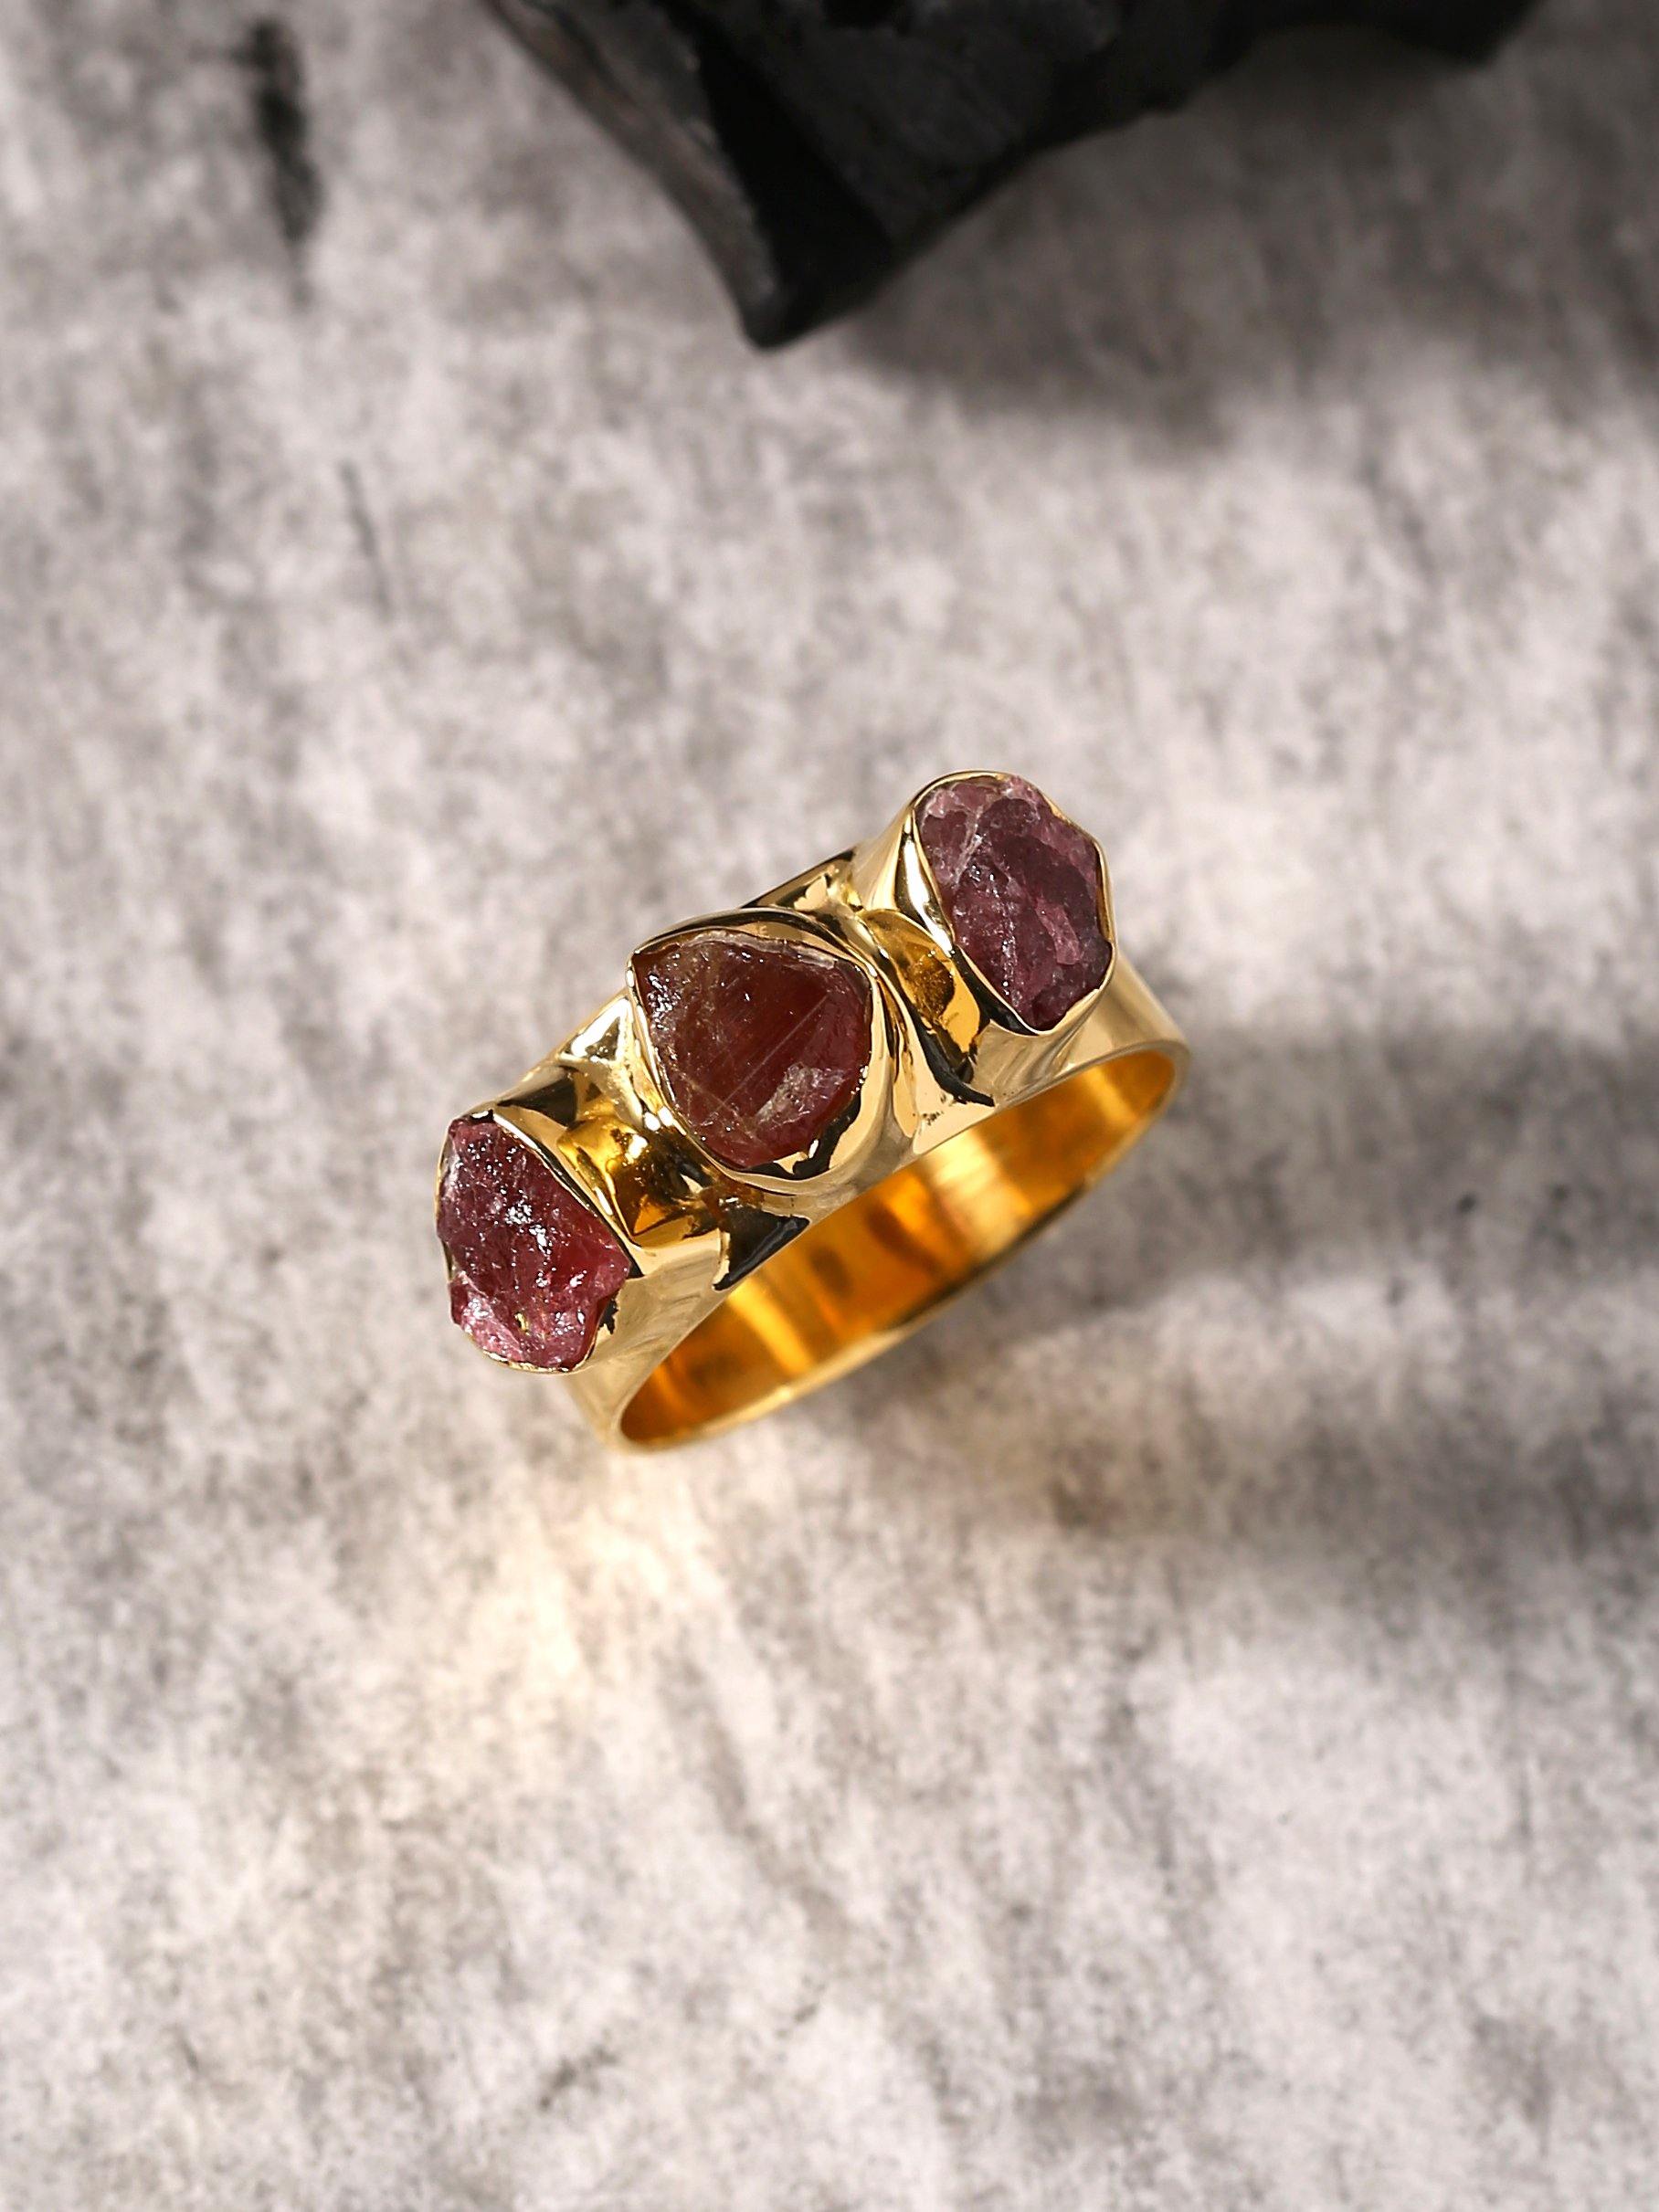 Rough Pink Tourmaline Solid 925 Sterling Silver Gold Plated Ring Jewelry - YoTreasure